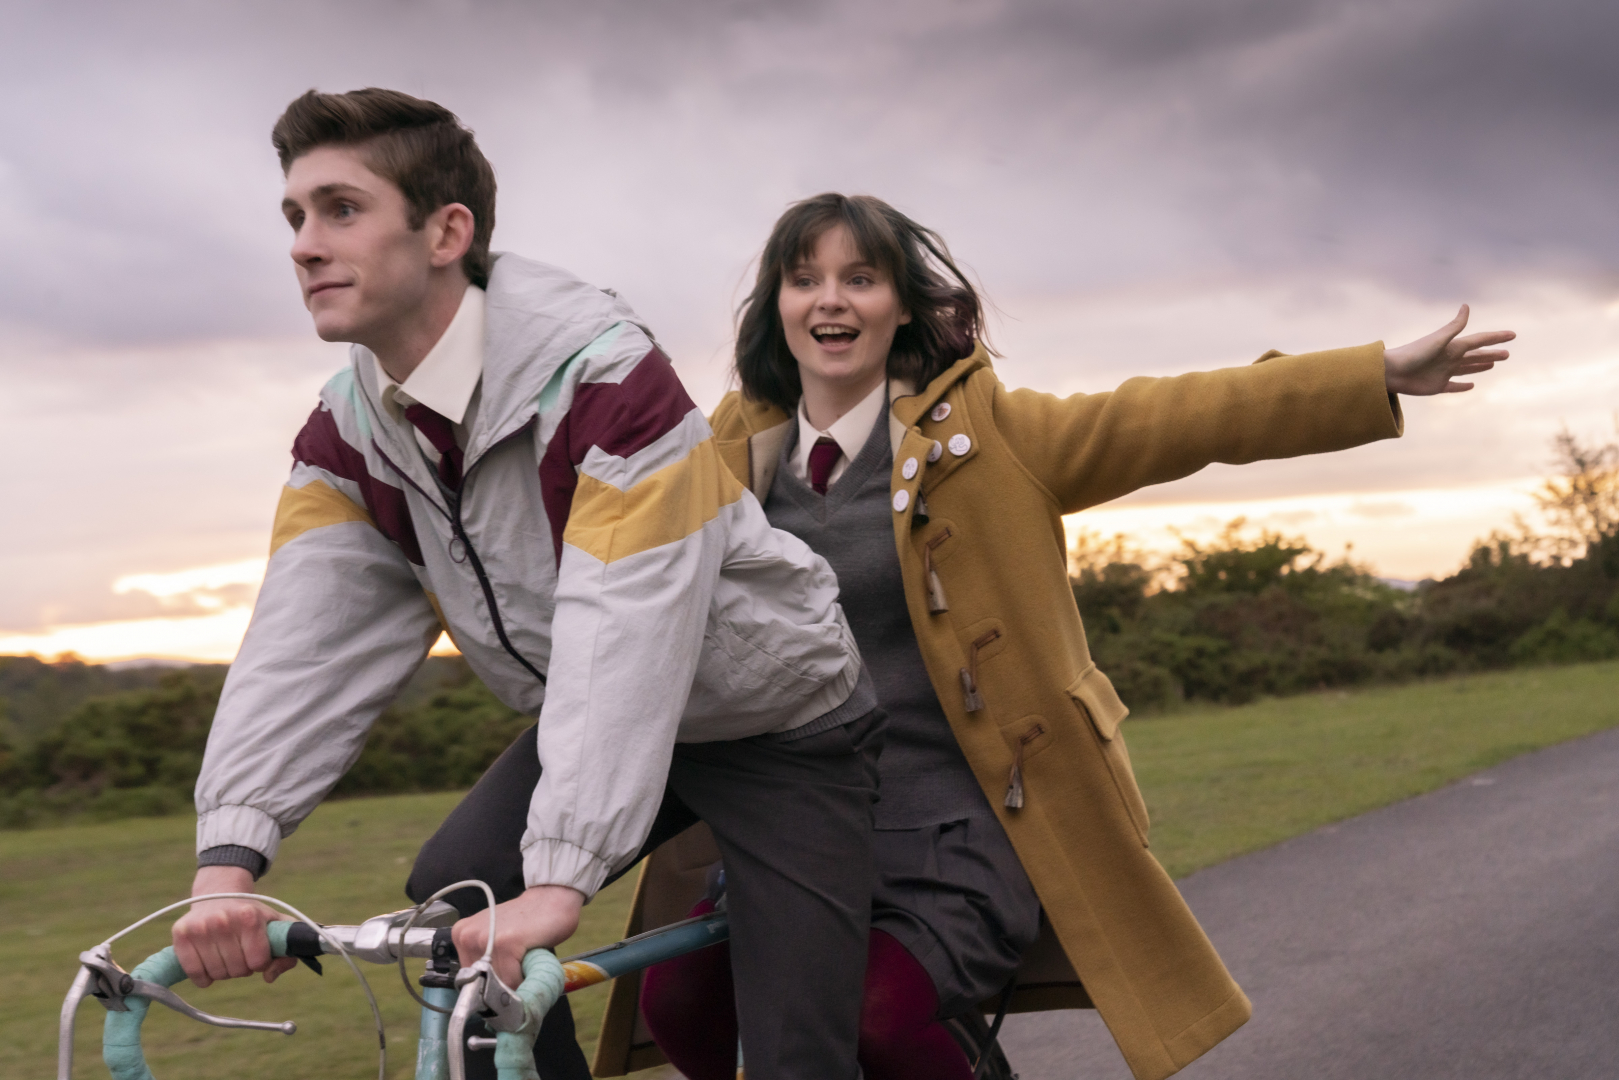 A still from Dating Amber. A worried looking teen boy is riding a bike with a teen girl spreading her arms happily behind him.